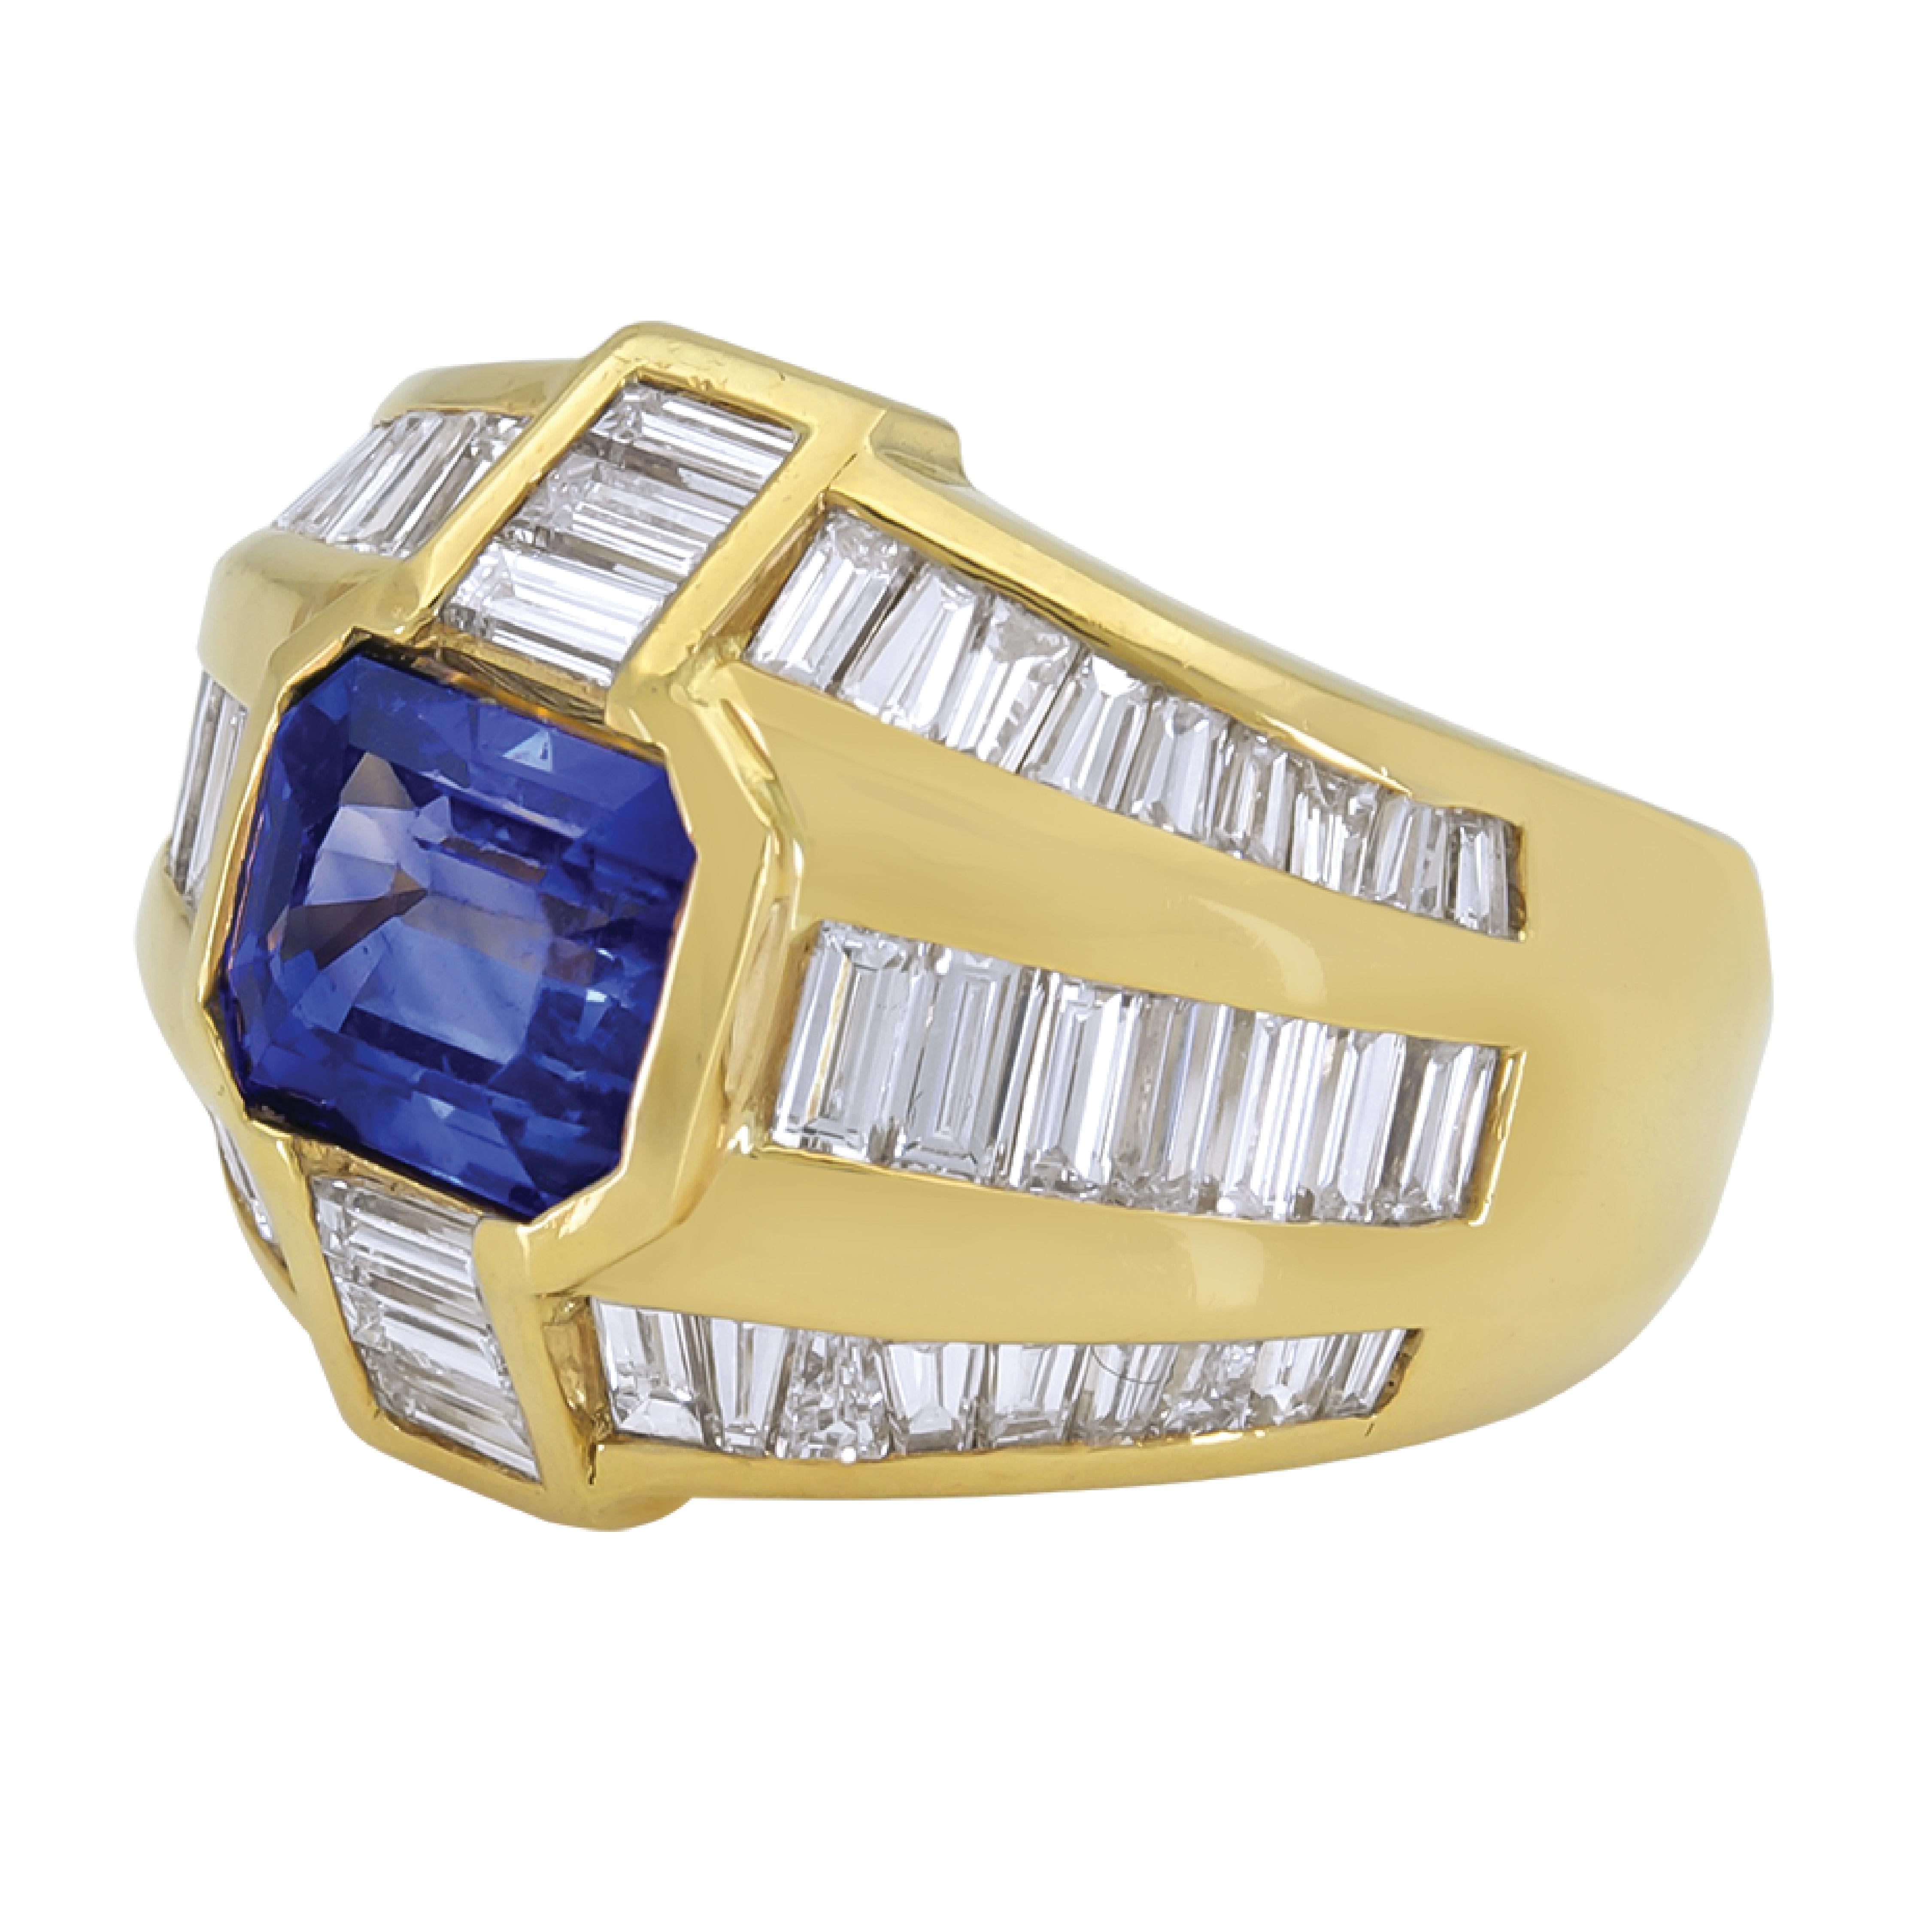 Created and made by Sophia D, this 18 Karat Yellow Gold Center features a blue sapphire weighing 3.04 total carats and accentuated with 2.76 carats weight of baguettes diamonds. 

Sophia D by Joseph Dardashti LTD has been known worldwide for 35